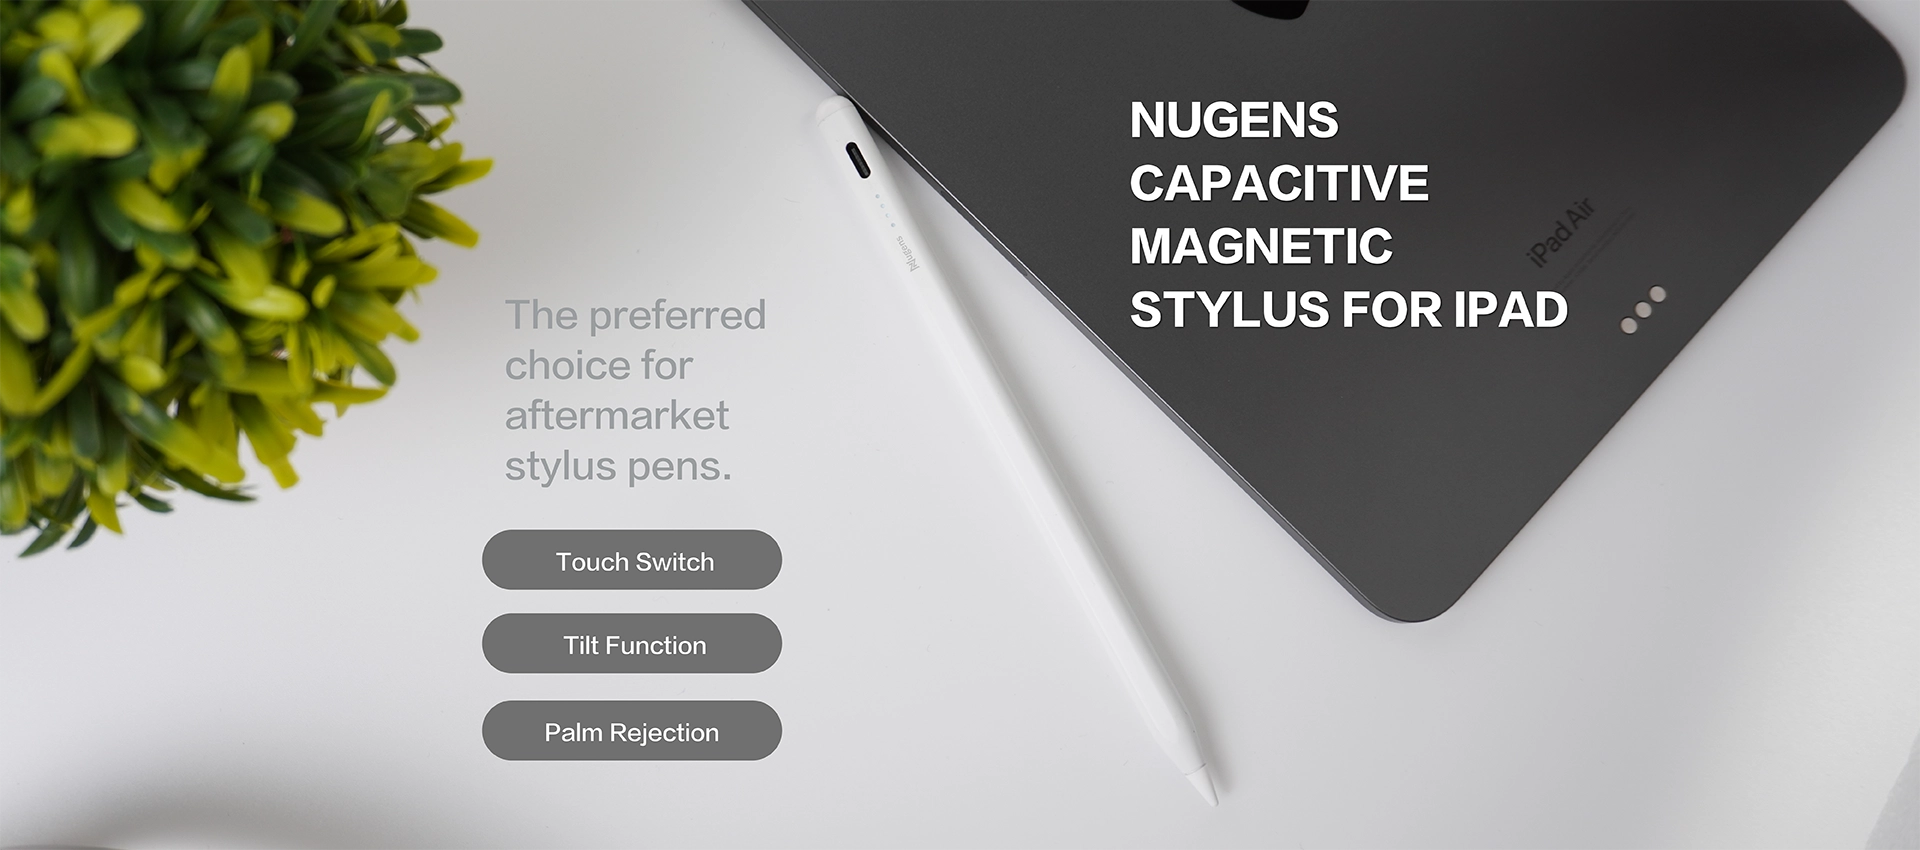 Nugens Capacitive Magnetic Stylus Banner-PC Type